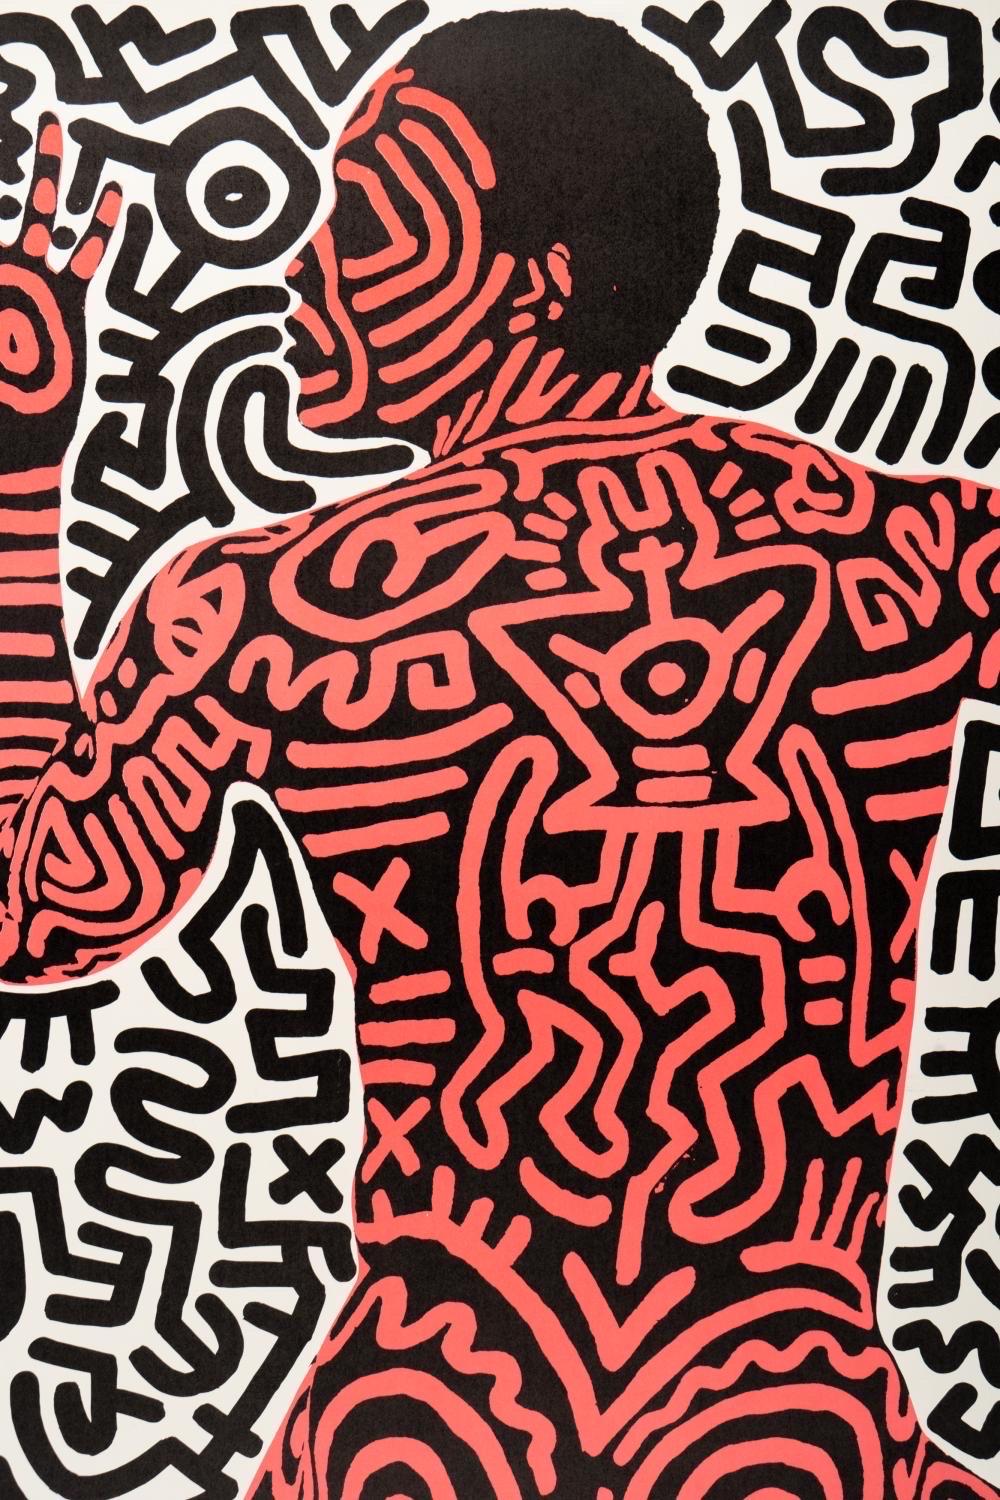 Paper Keith Haring (1958-1990): Into 84 Lithograph, Signed 